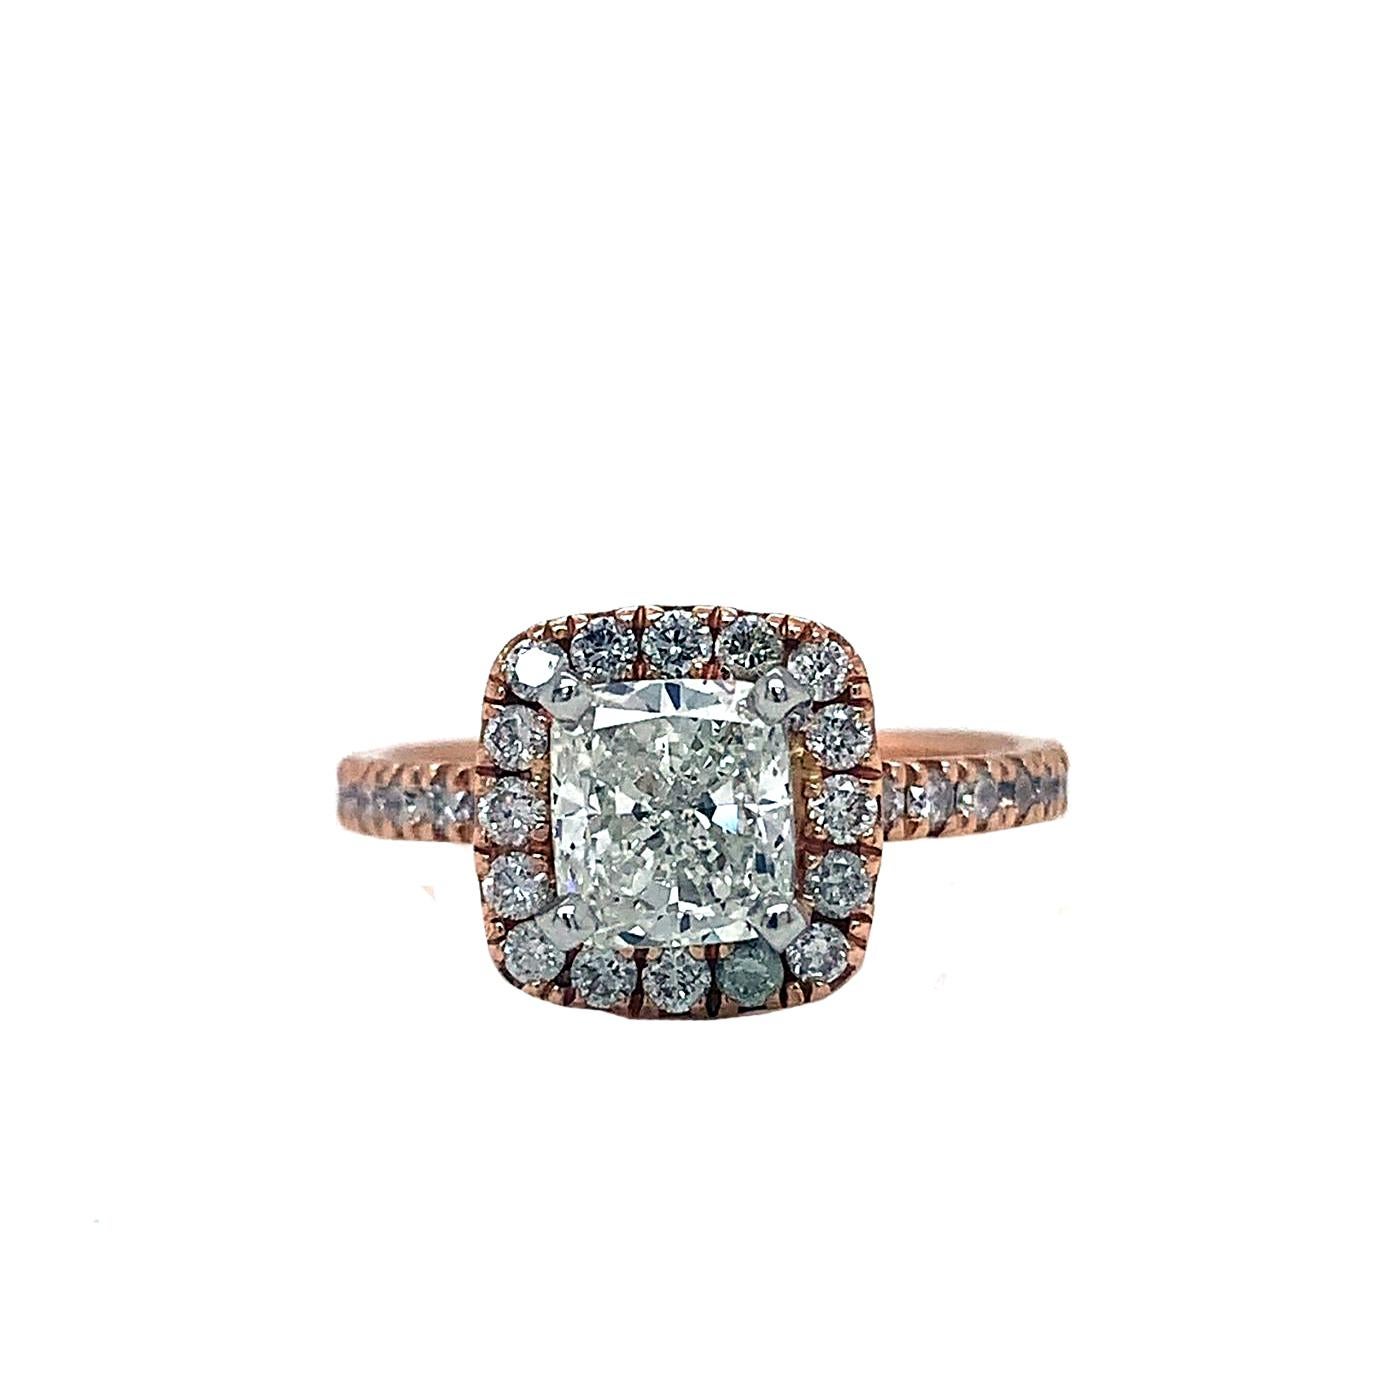 A beautiful handmade engagement ring, The center diamond of this ring is 1.22CT, SI1 Clarity and I color. The ring can be set with any stone you choose or in any carat weight. Your satisfaction is our priority. This ring is absolutely perfect for an